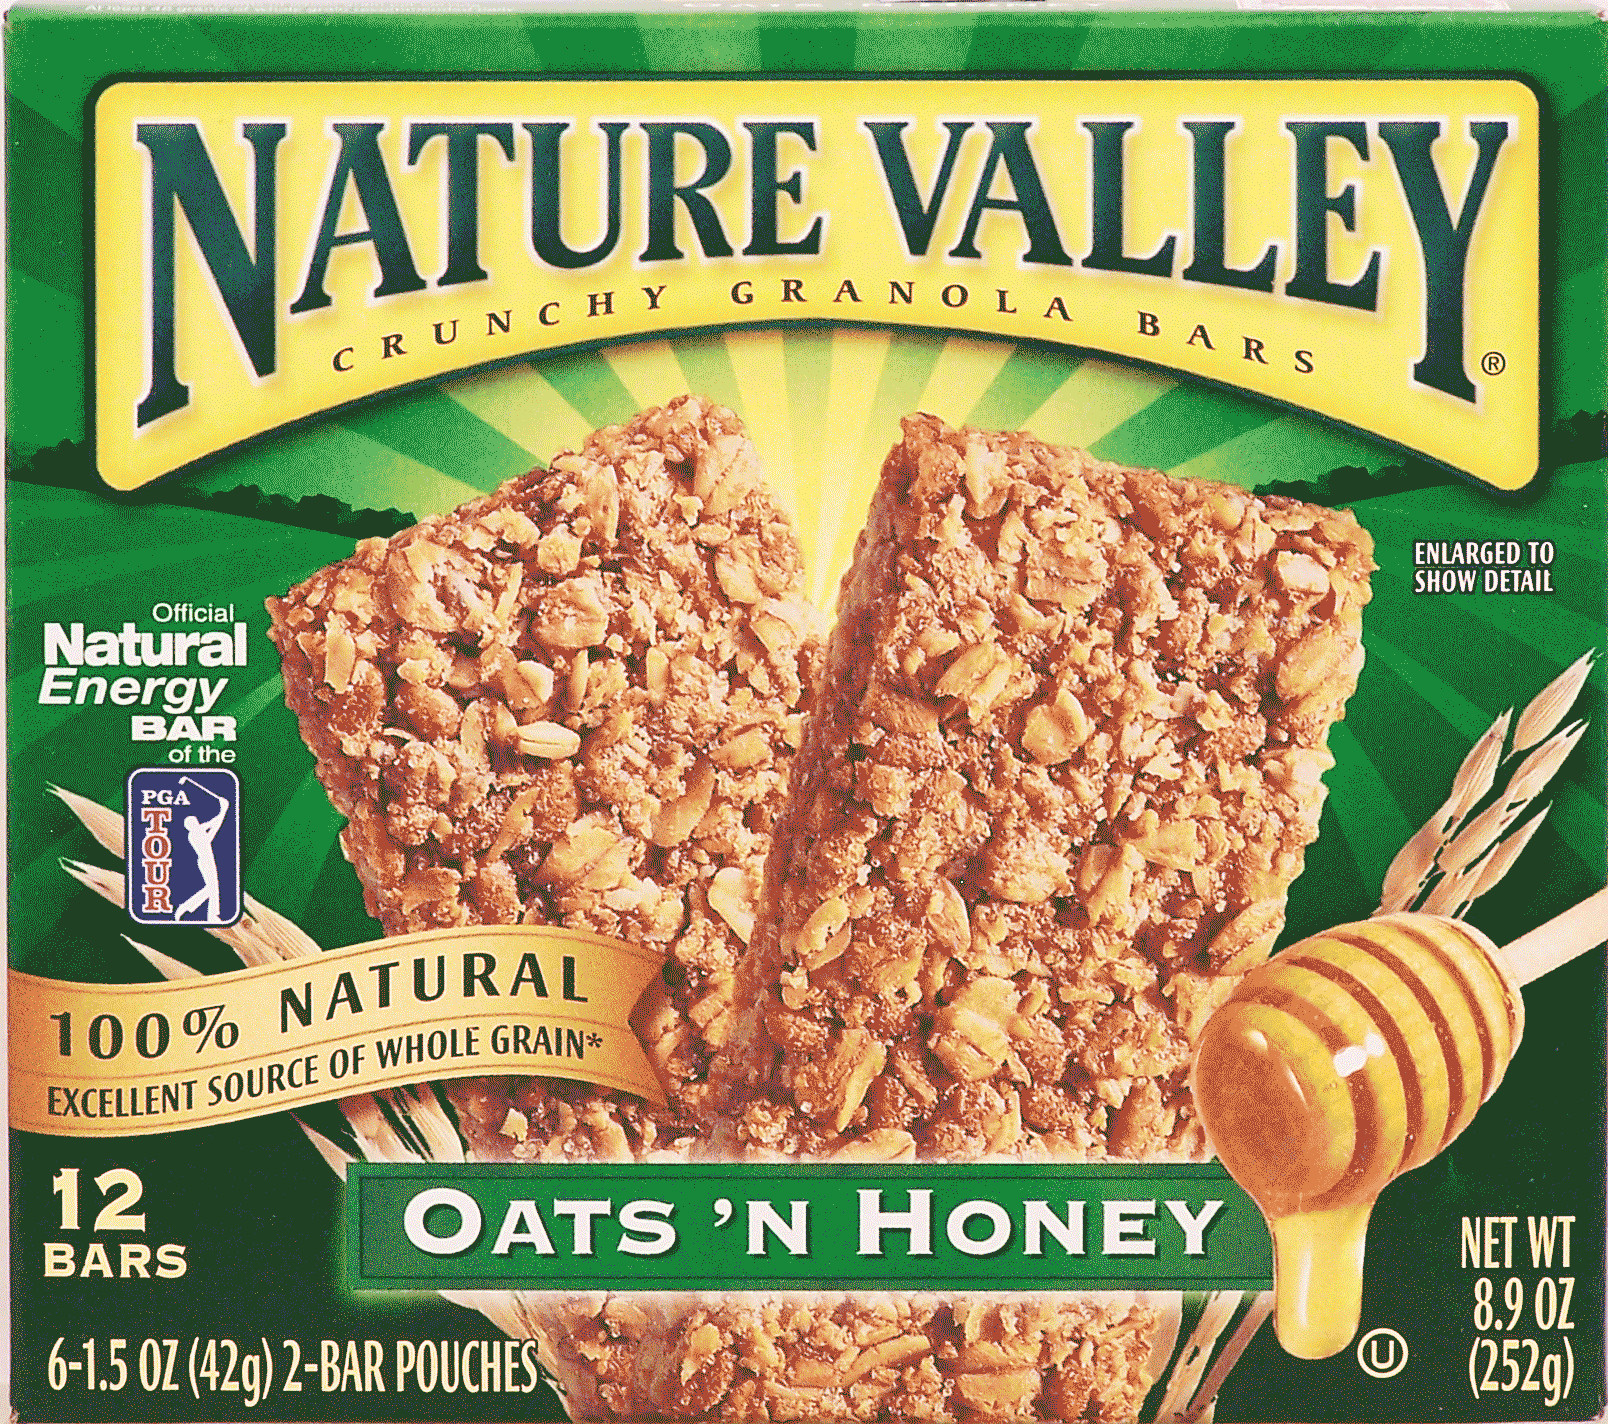 Nature Valley Oats And Honey Gluten Free
 nature valley crunchy granola bars oats n honey gluten free